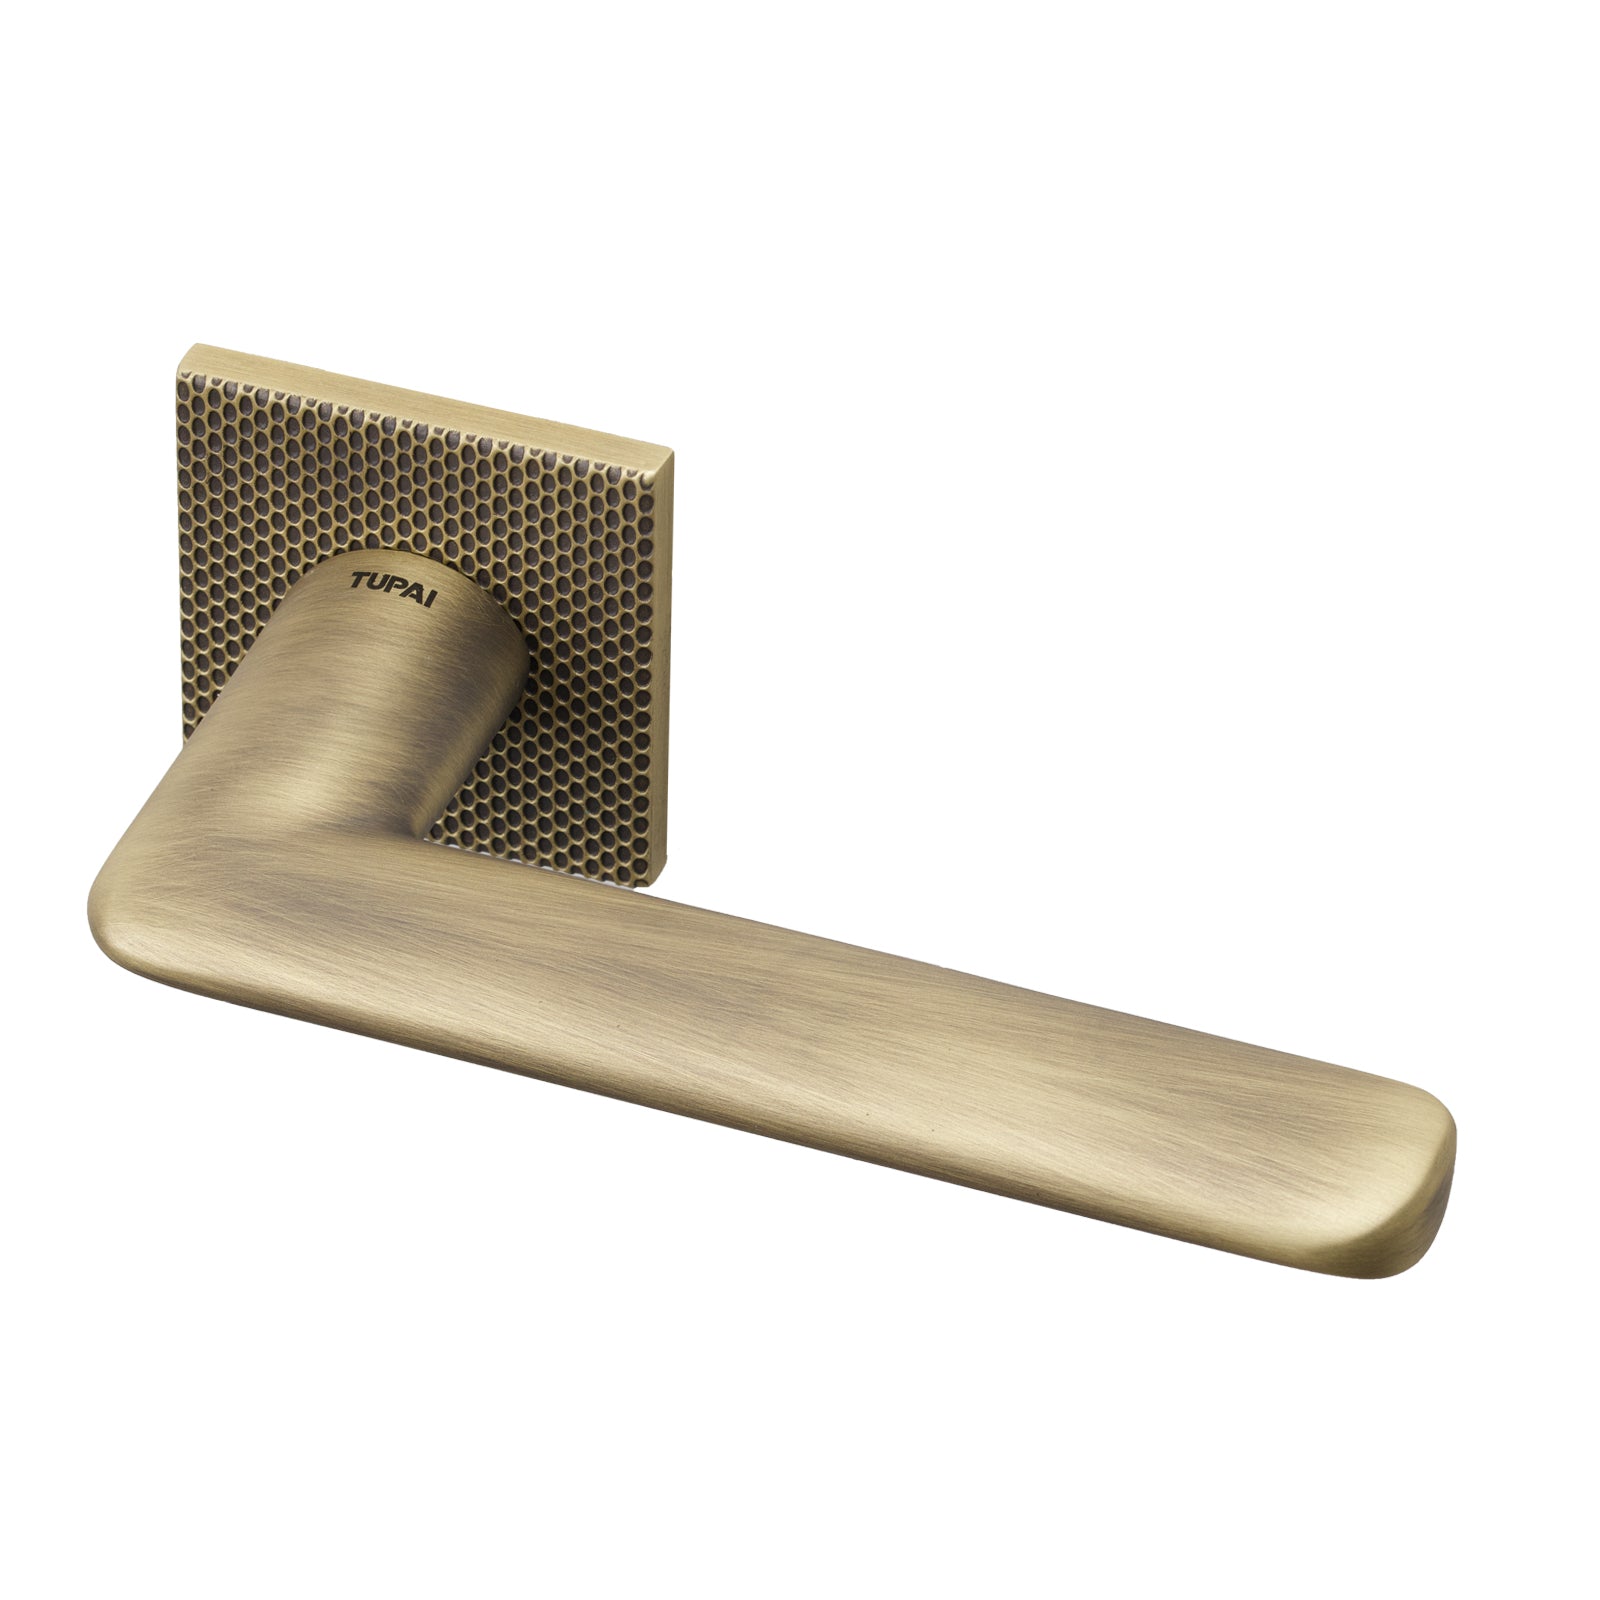 Tupai Edral lever on rose door handle with Pebbles texture design in Aged Brass Finish SHOW